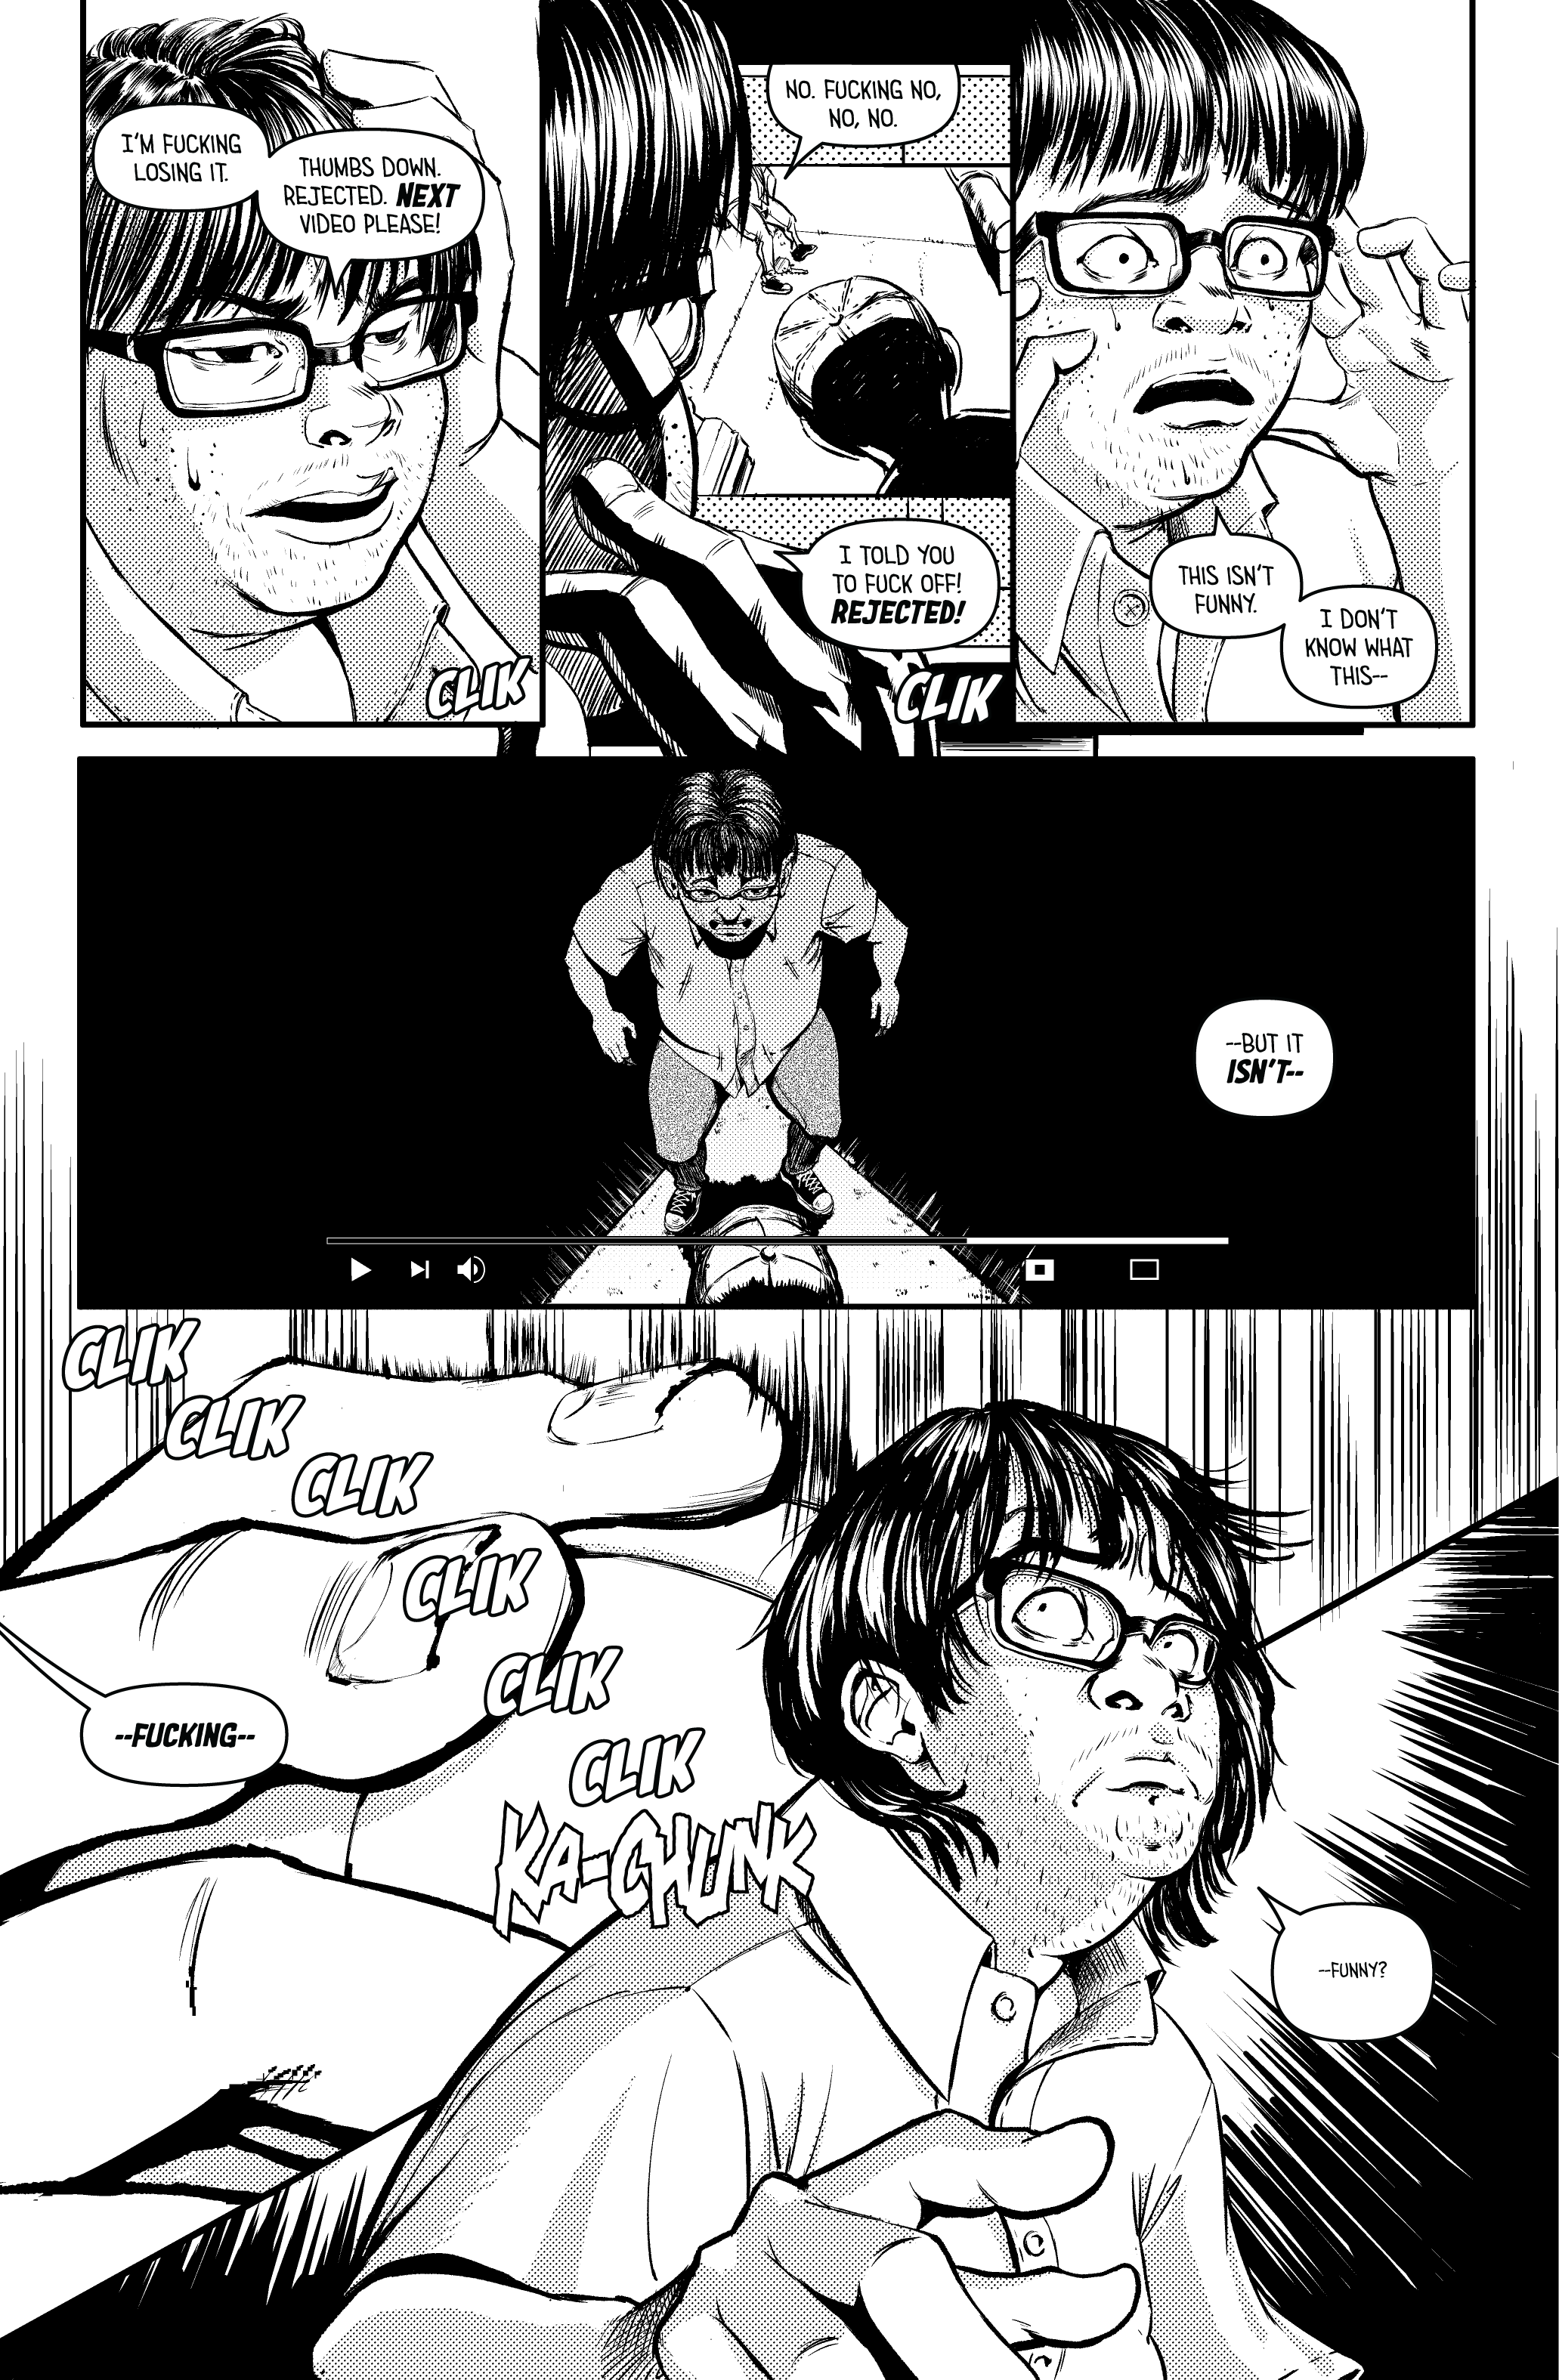 Monocul issue 05 story 03 pg 06 - Content Warning-01.png